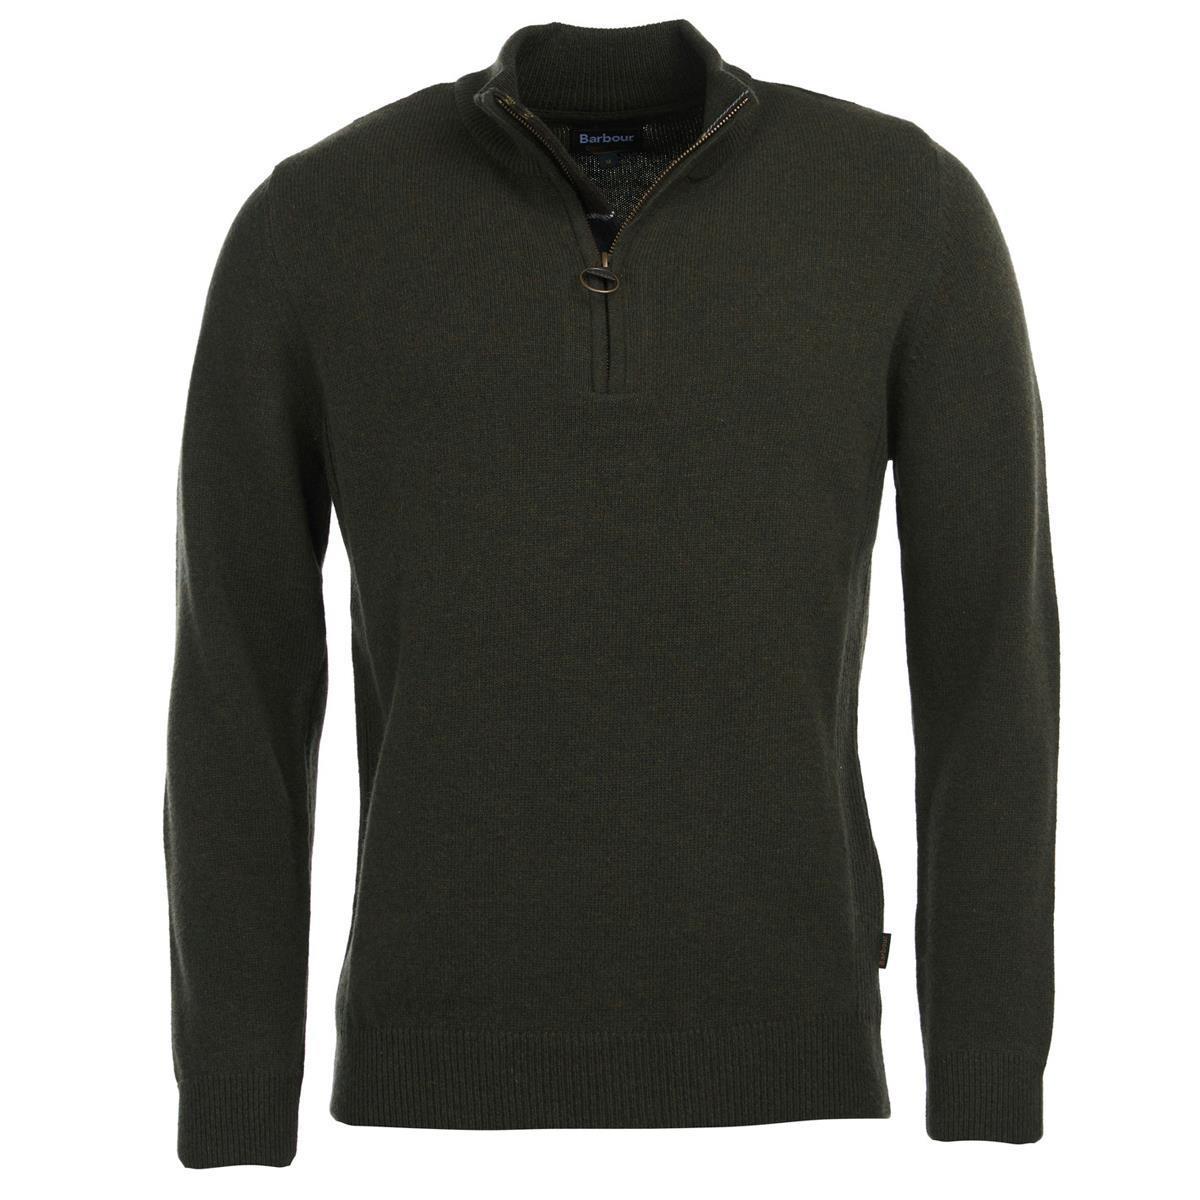 Barbour Mens Holden Half Zip Questions & Answers